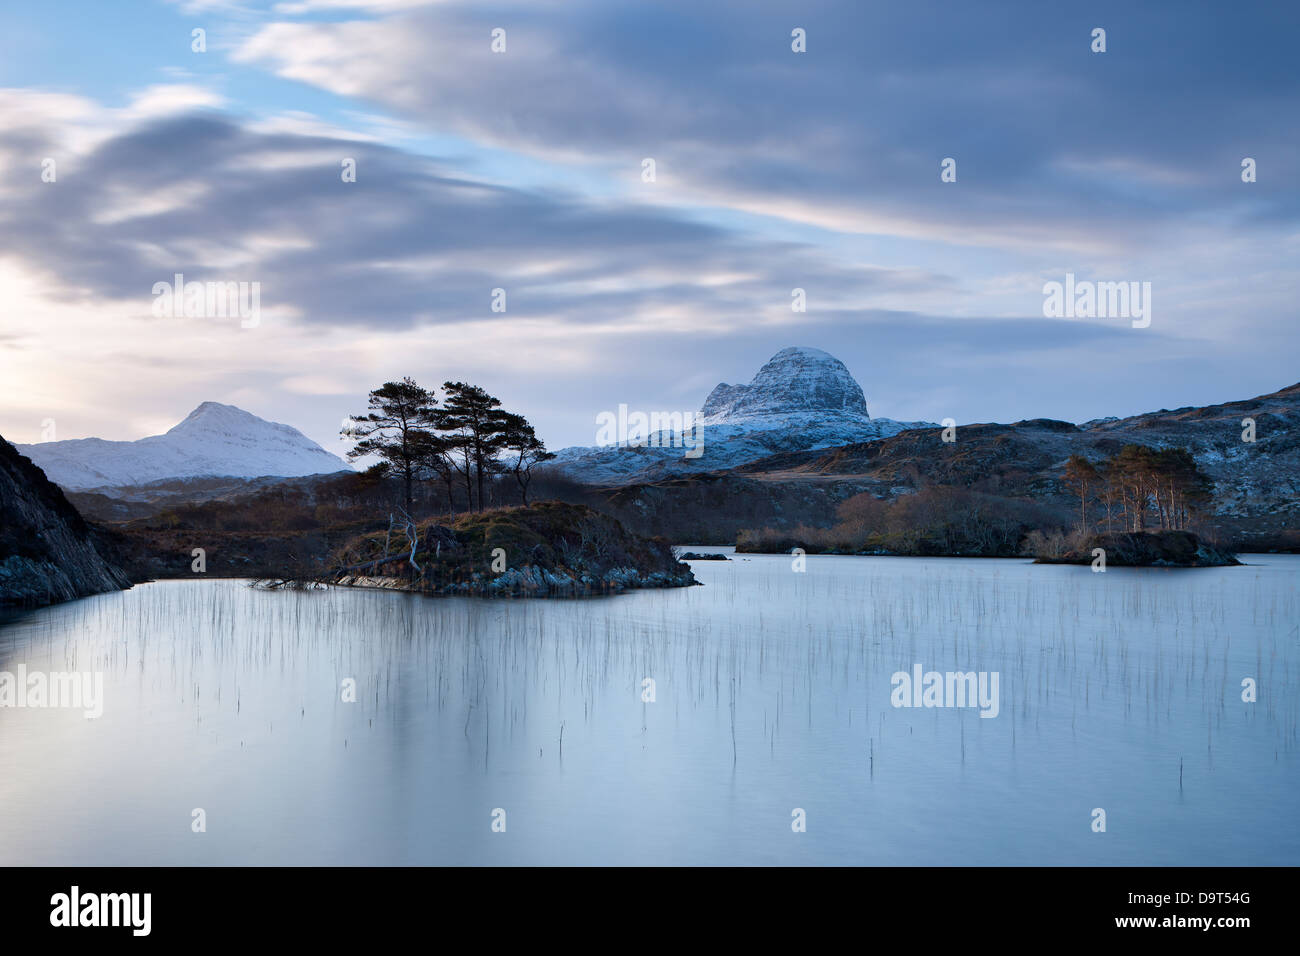 Loch Druim Suardalain with Mts Canisp & Suilven dusted in snow, Sutherland, Scotland, UK Stock Photo